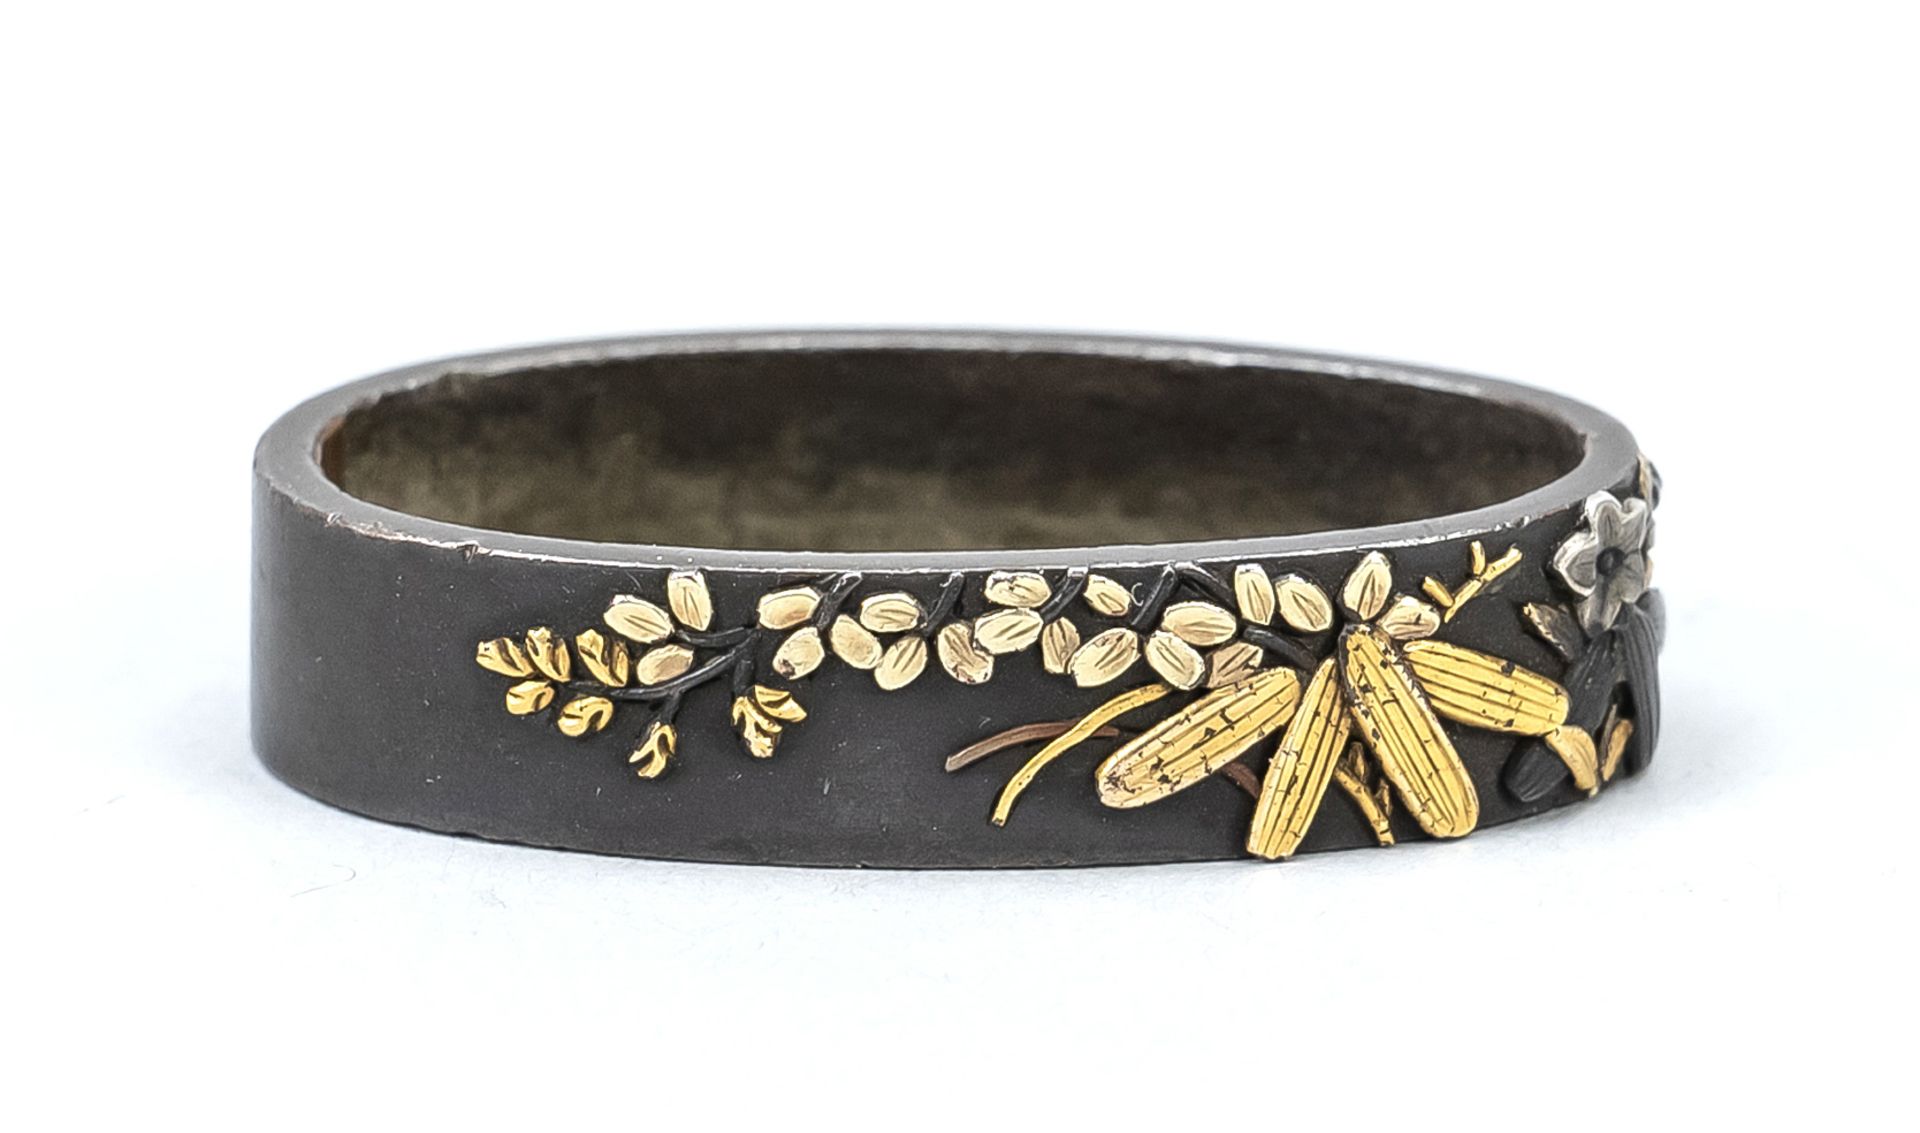 Fuchi, Japan, Edo period, 18th/19th century, relief on smooth ground, details in silver, gold and